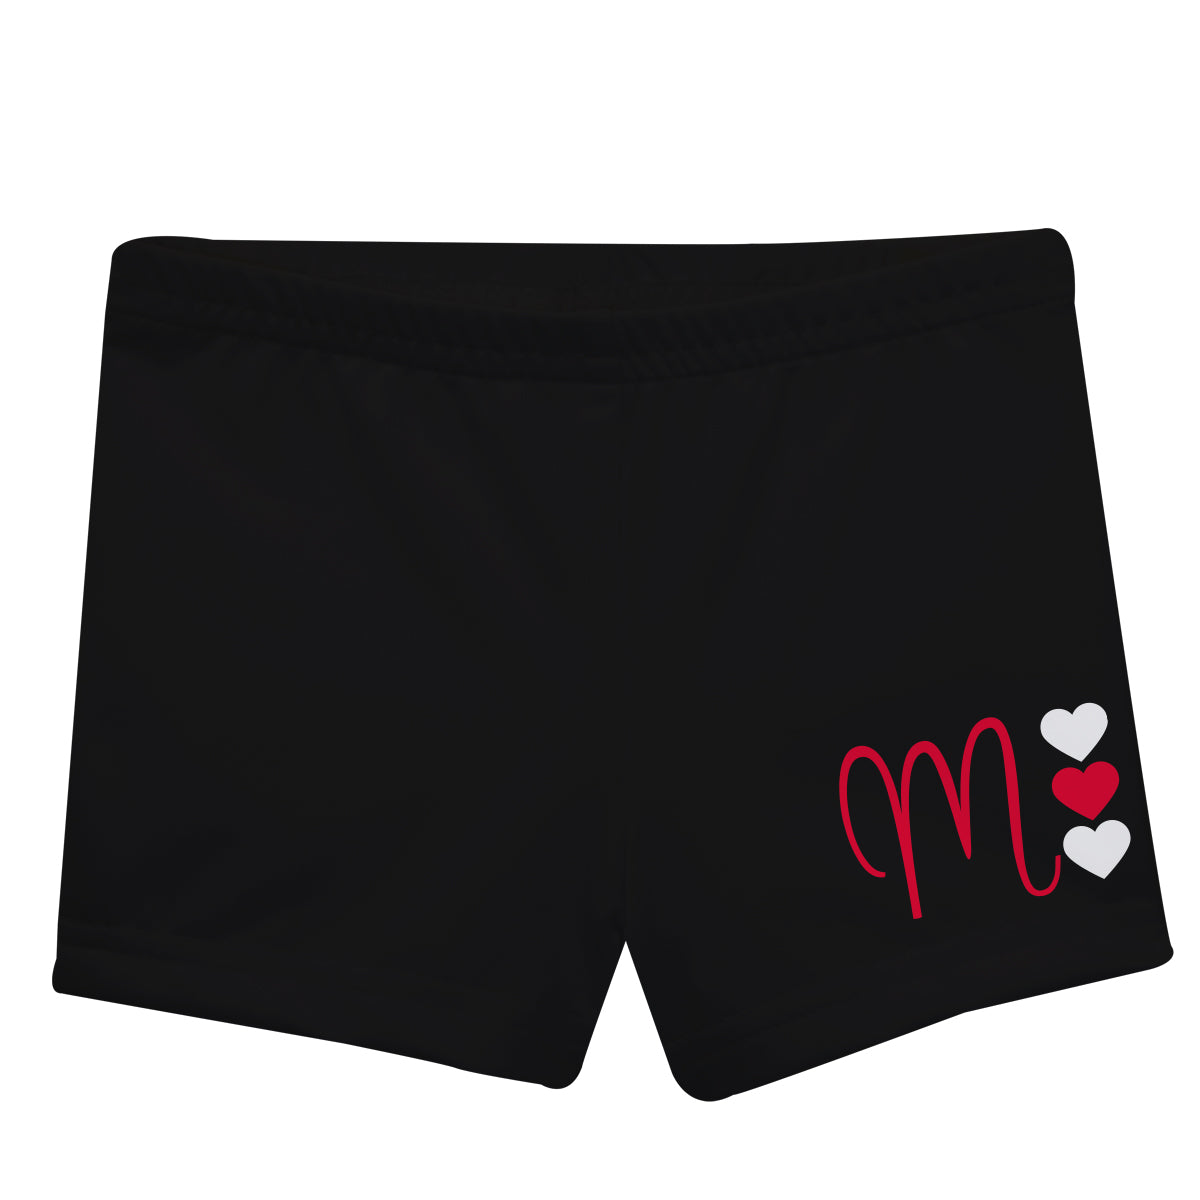 Initial Black and Red Shorties - Wimziy&Co.